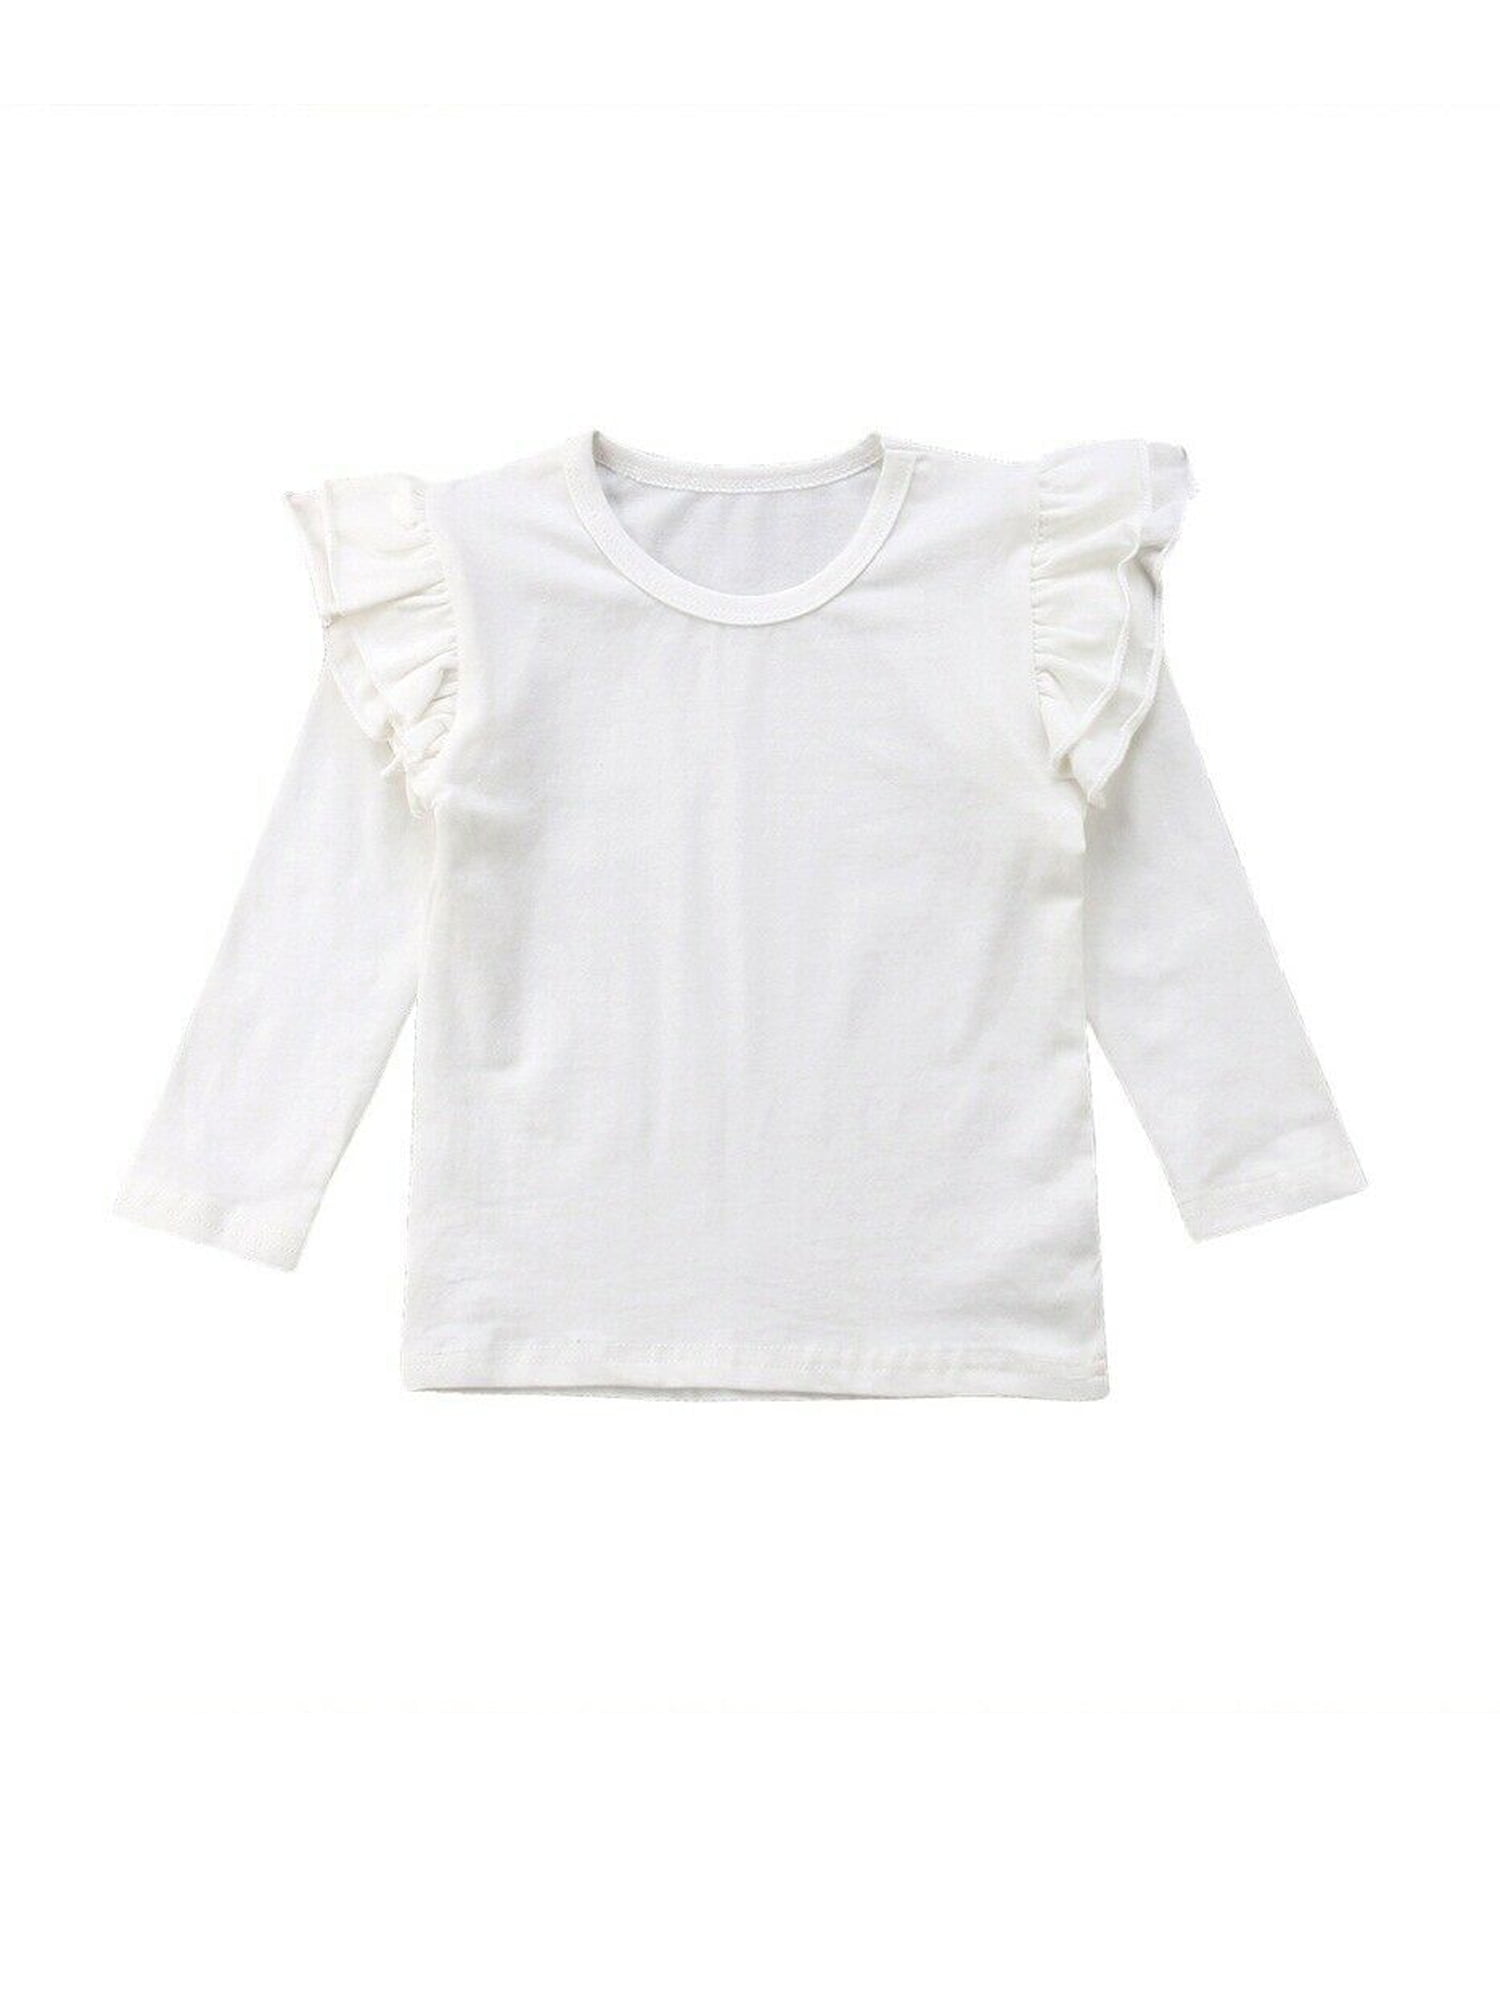 Dewadbow Baby Girl Toddler Kids Long Sleeve Tops Tee Clothes Solid Color Blouse T-shirt